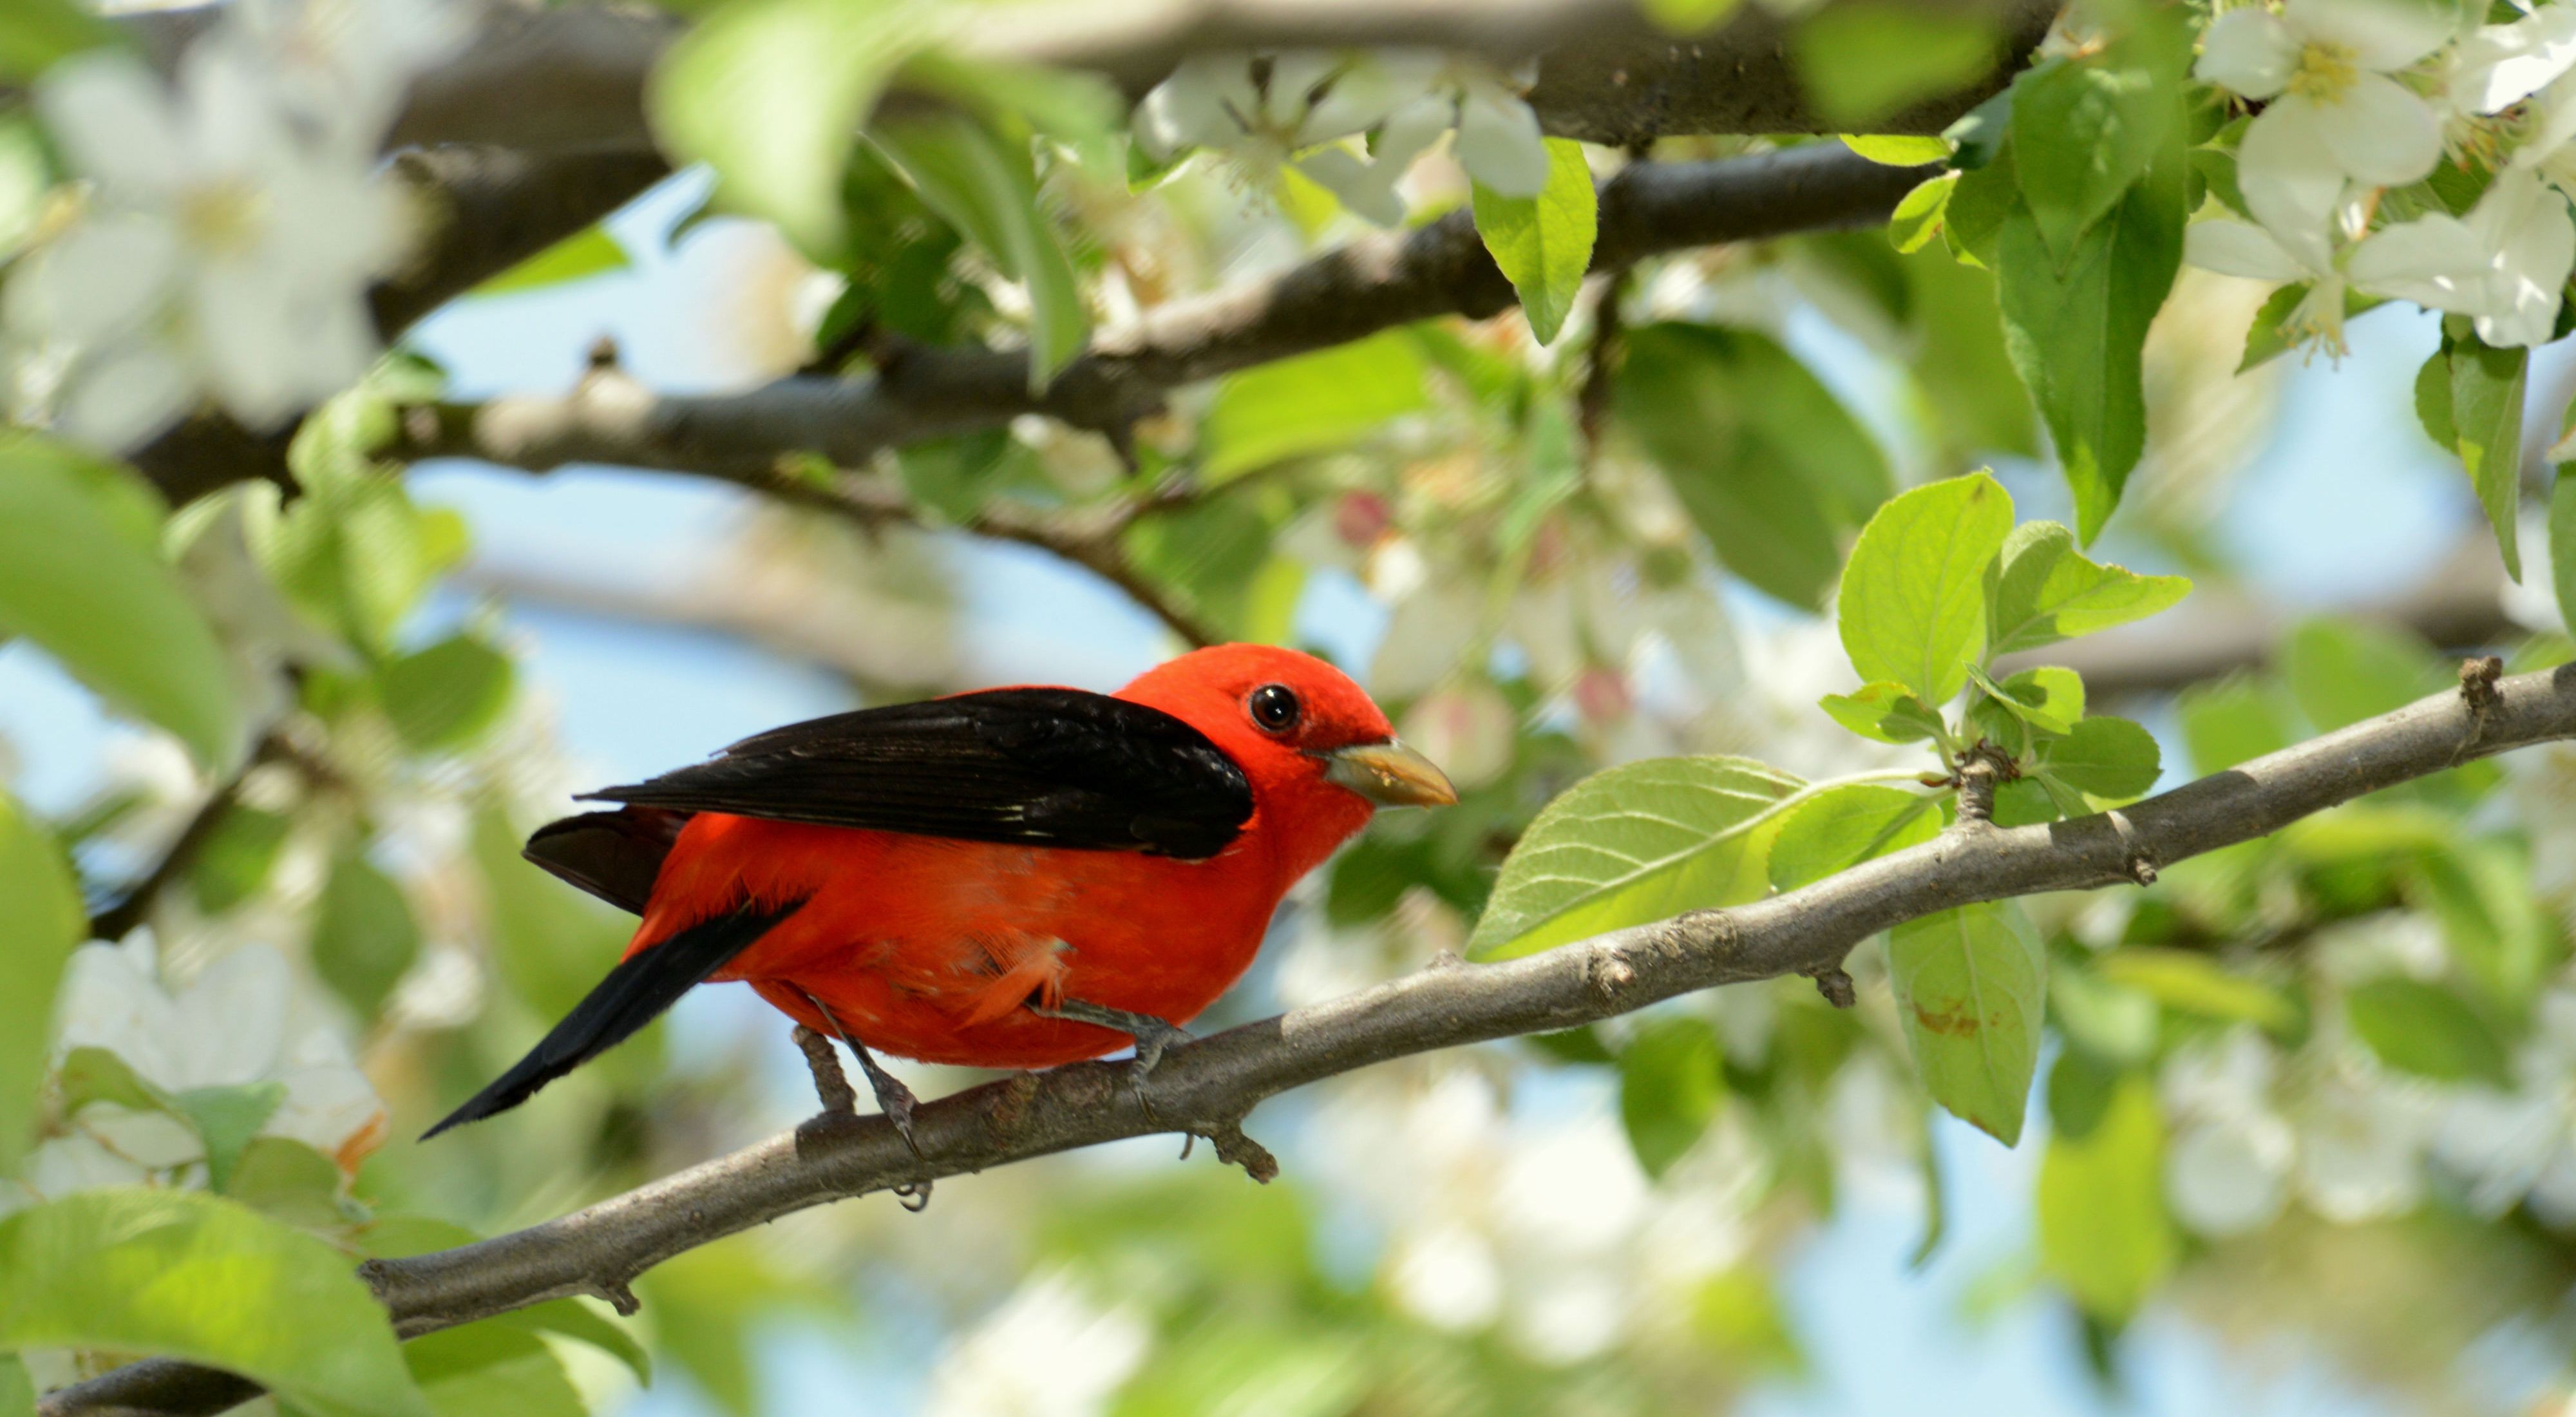 A male scarlet tanager perched on a flowering tree branch.